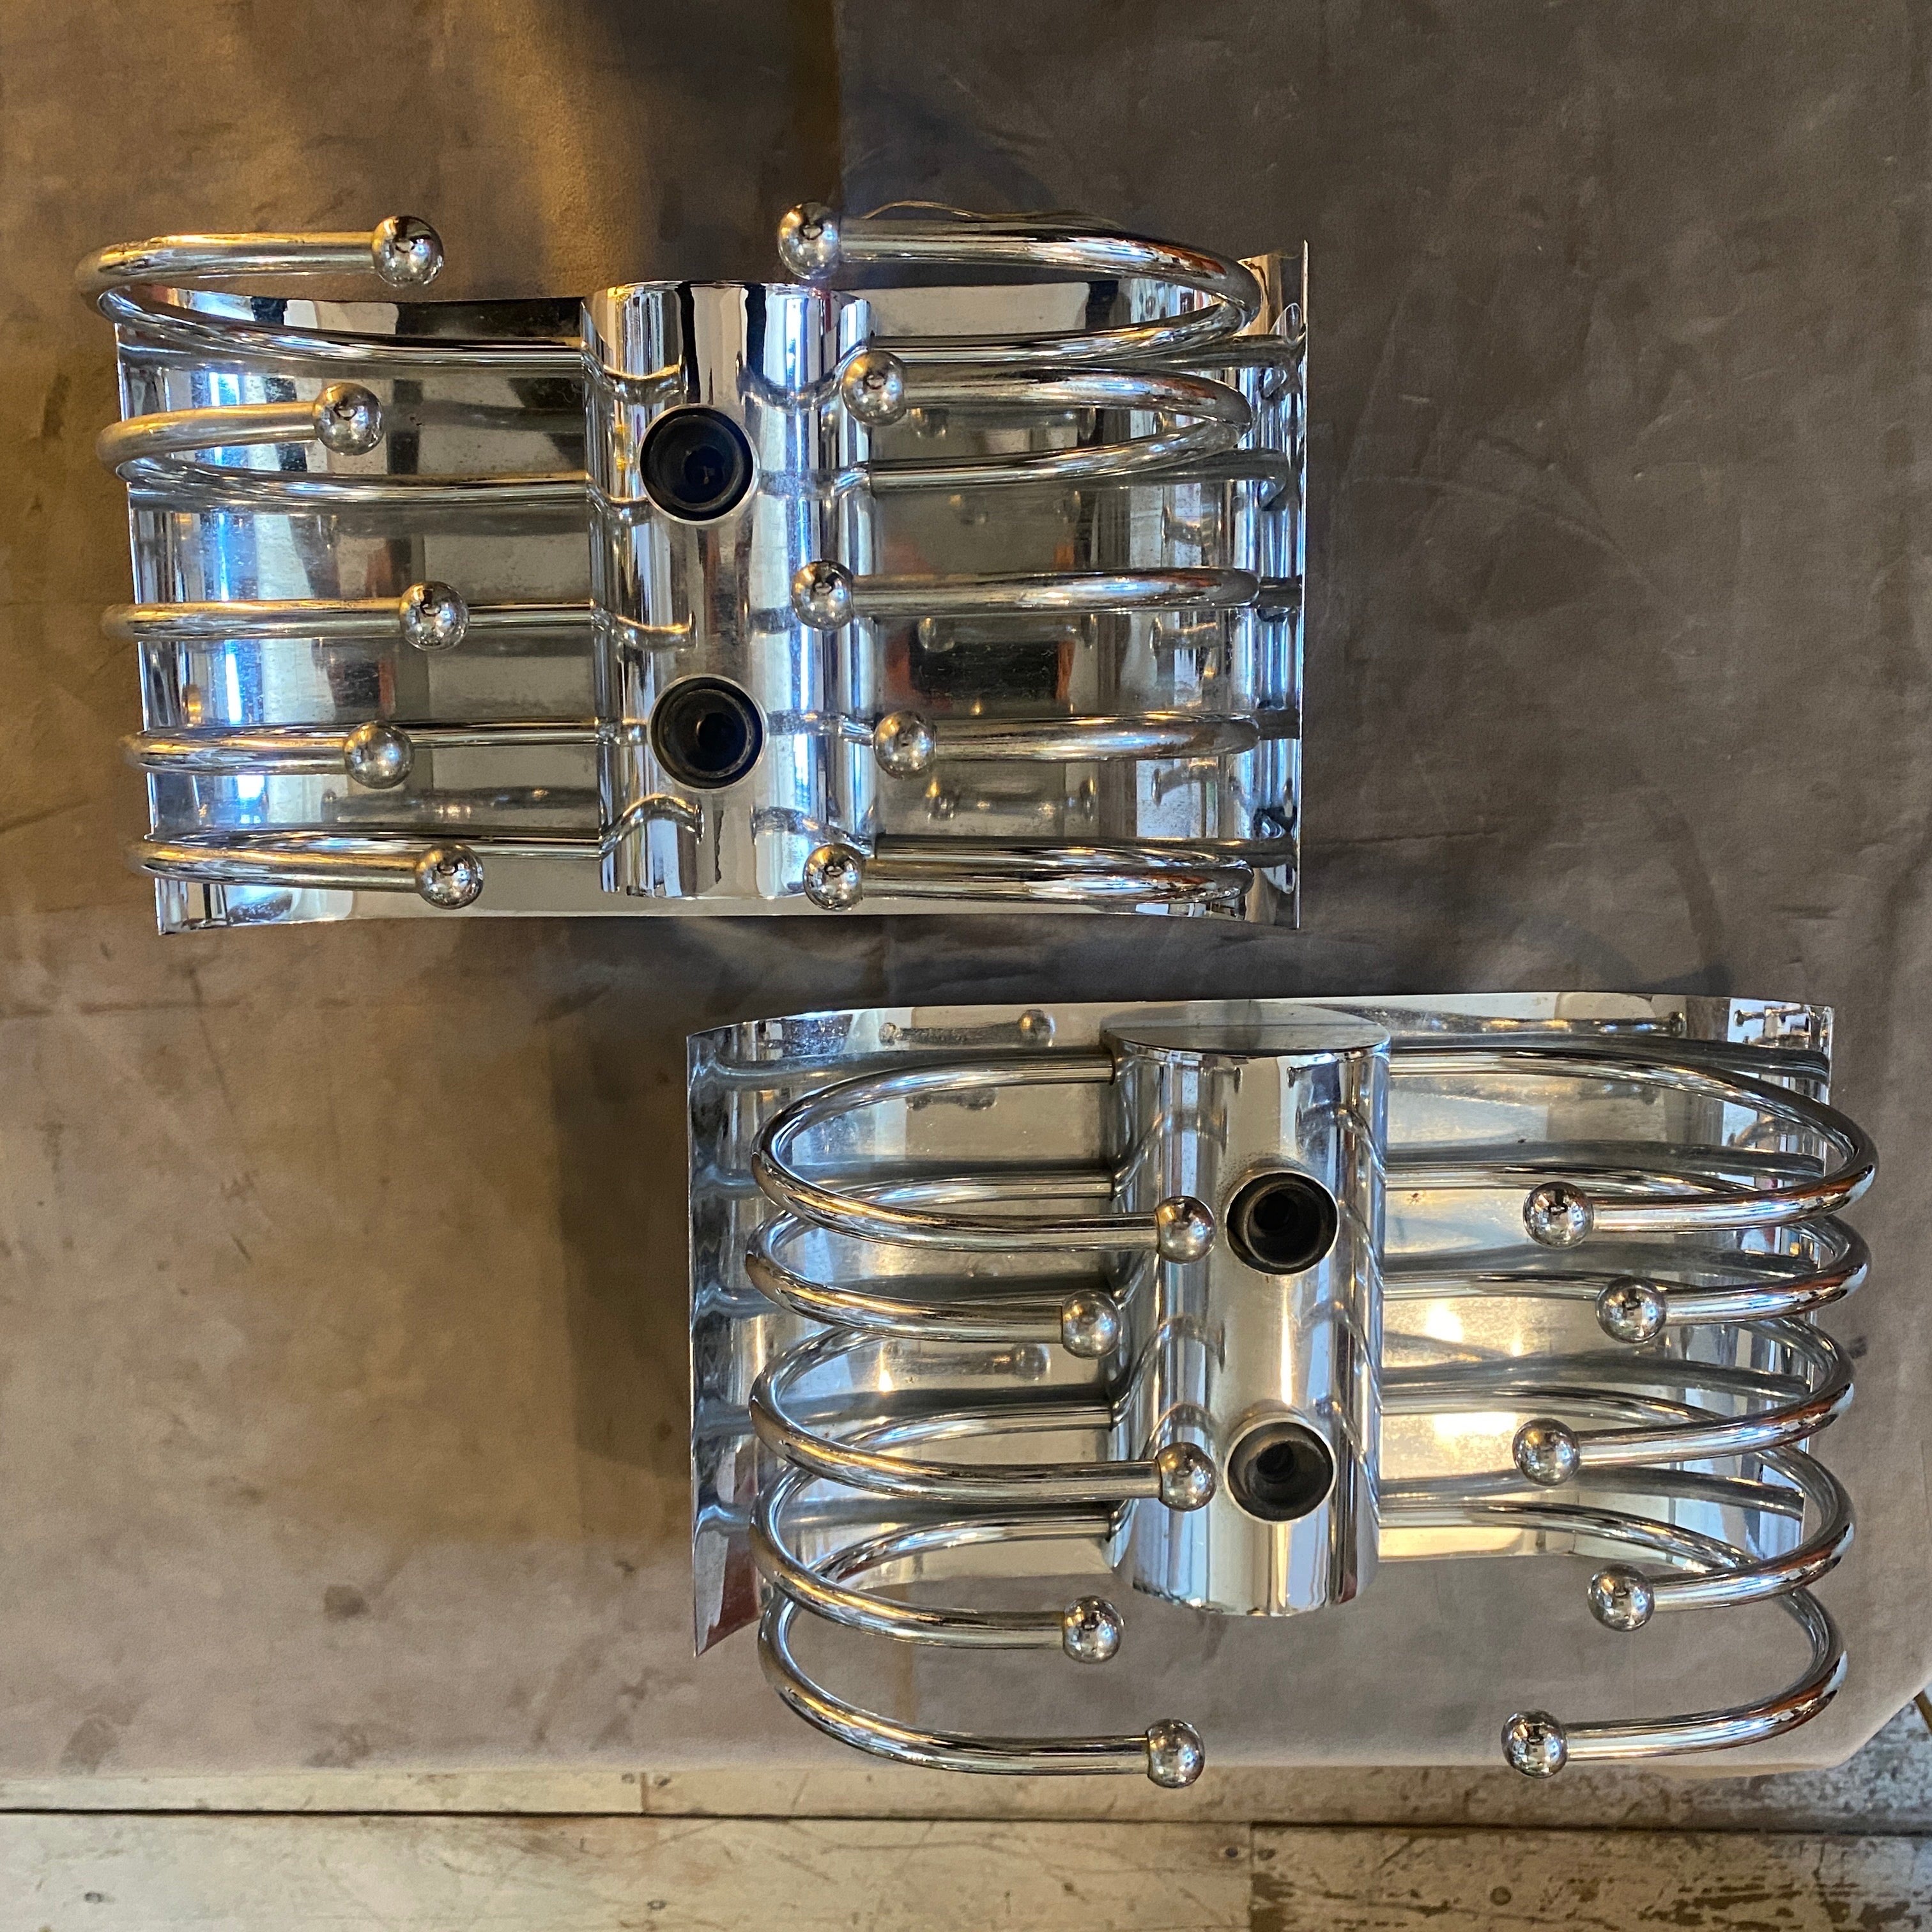 Two chromed metal wall sconces designed and manufactured in Italy in the Space Age era inspired by the pistillo sconces of Studio Tetrarch that were a popular design in the 1960s and 1970s, featuring a distinctive bulbous shape and made of glass and